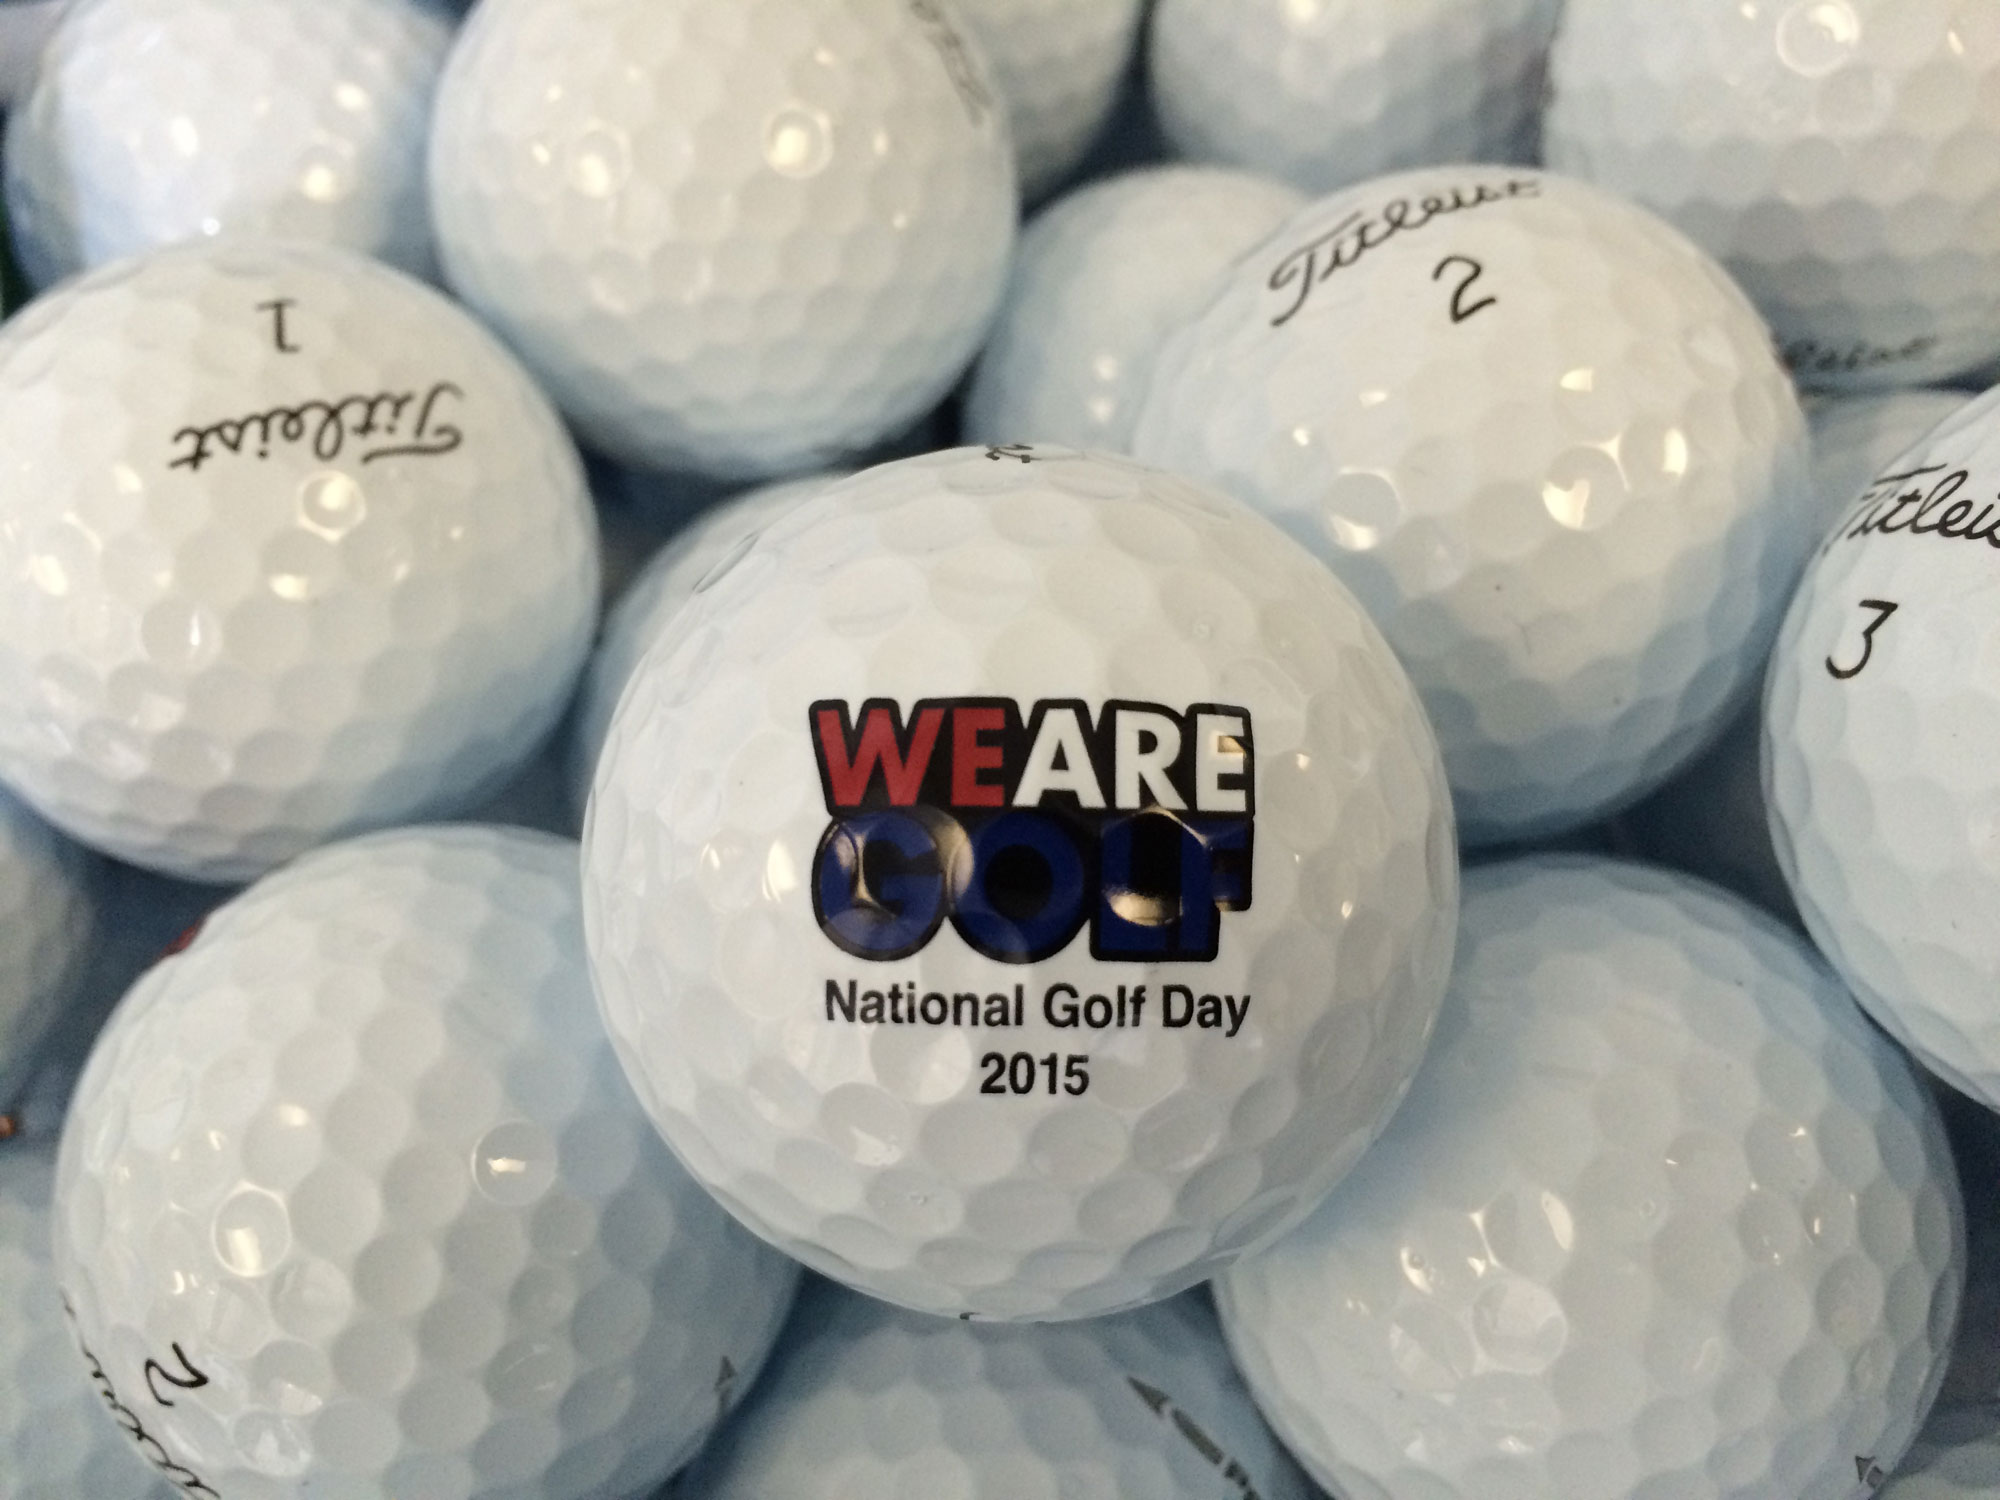 Lawmakers and legends celebrate National Golf Day